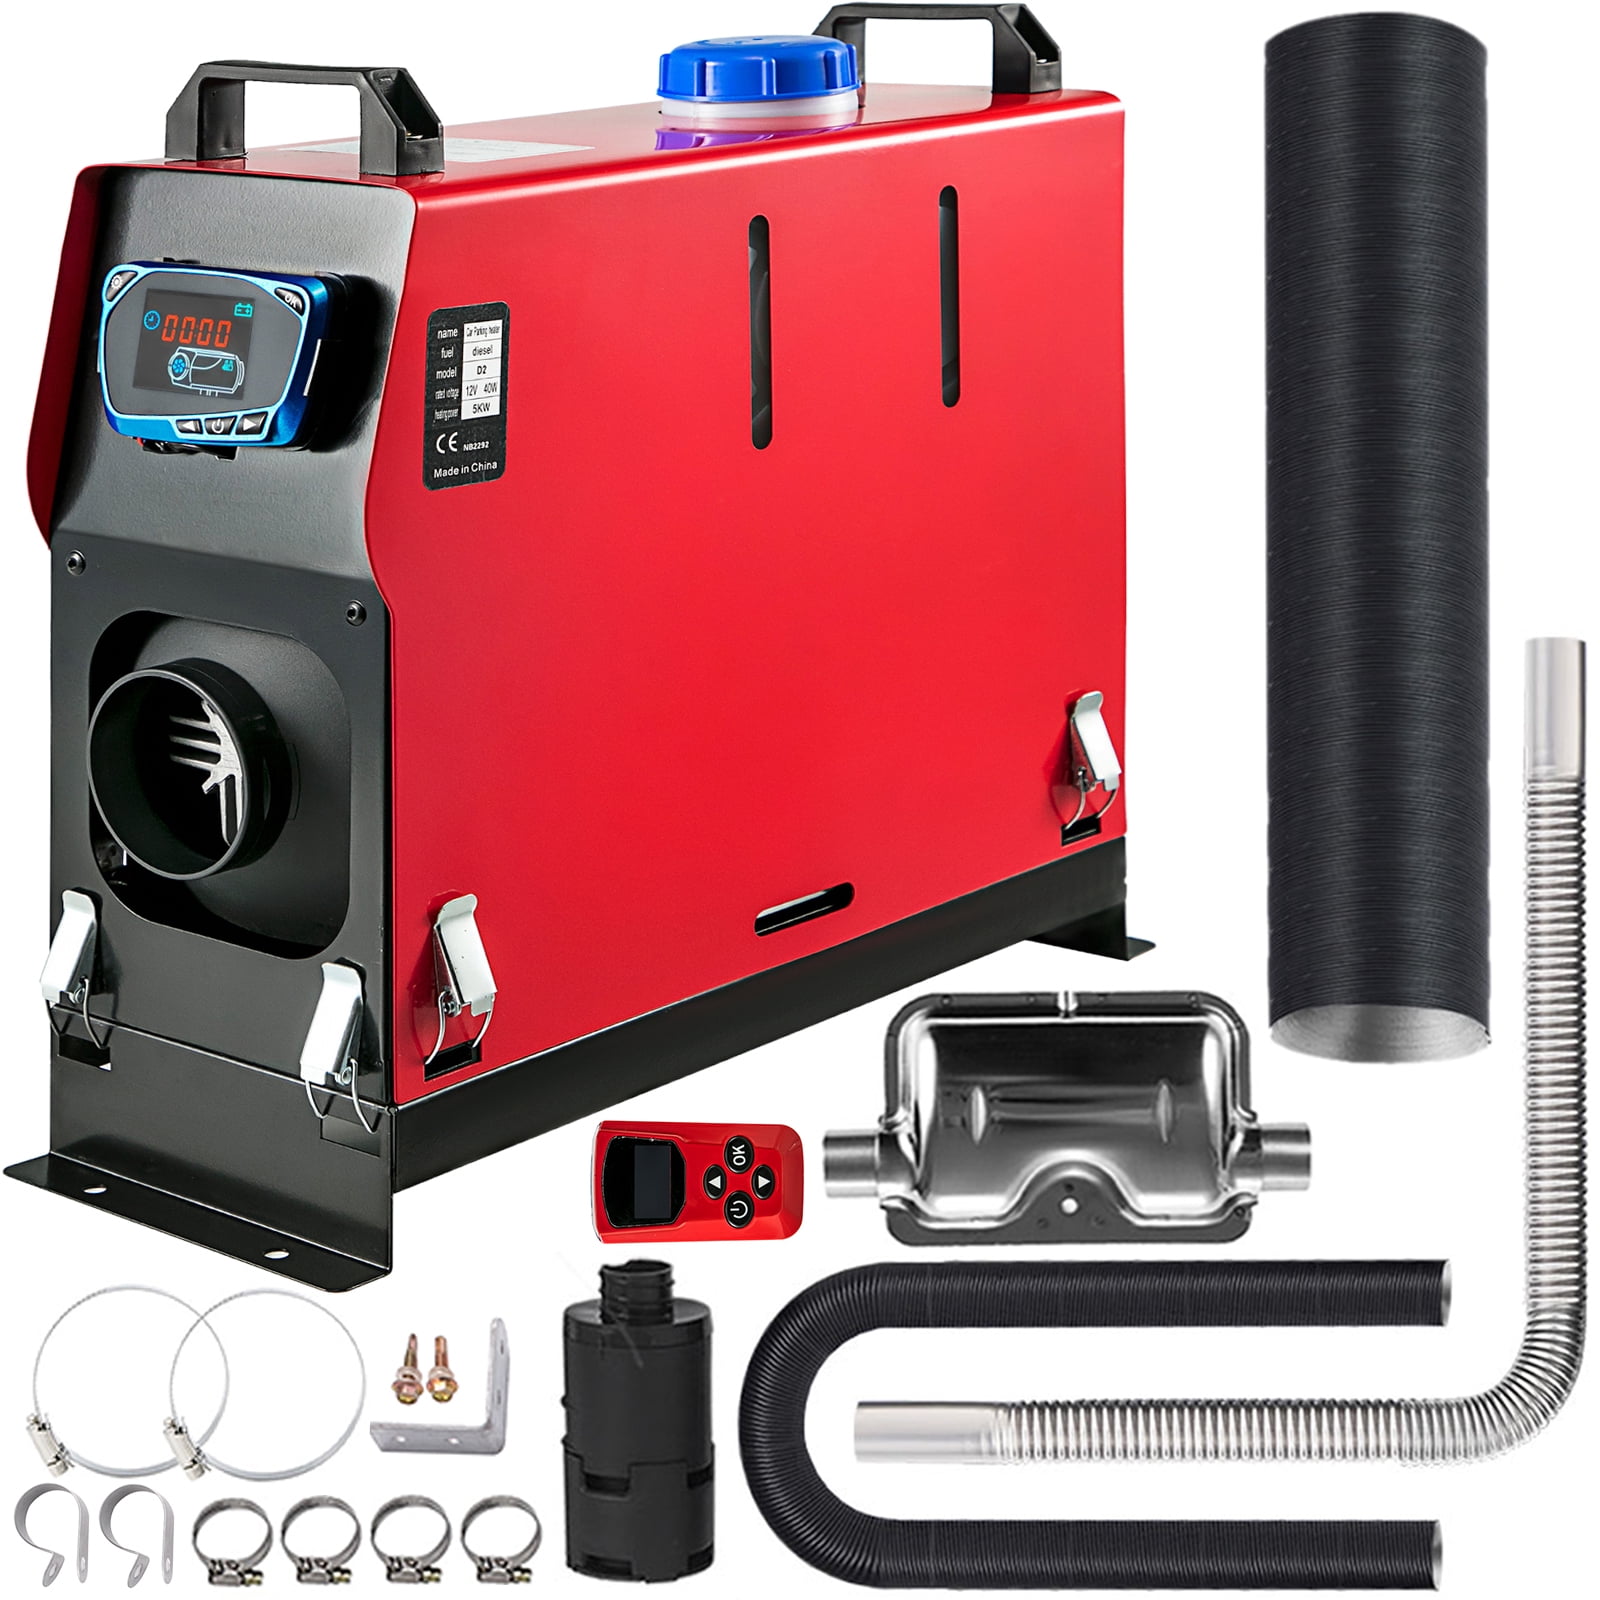 Portable Vevor Diesel Heater (All-In-One) Review & Setup